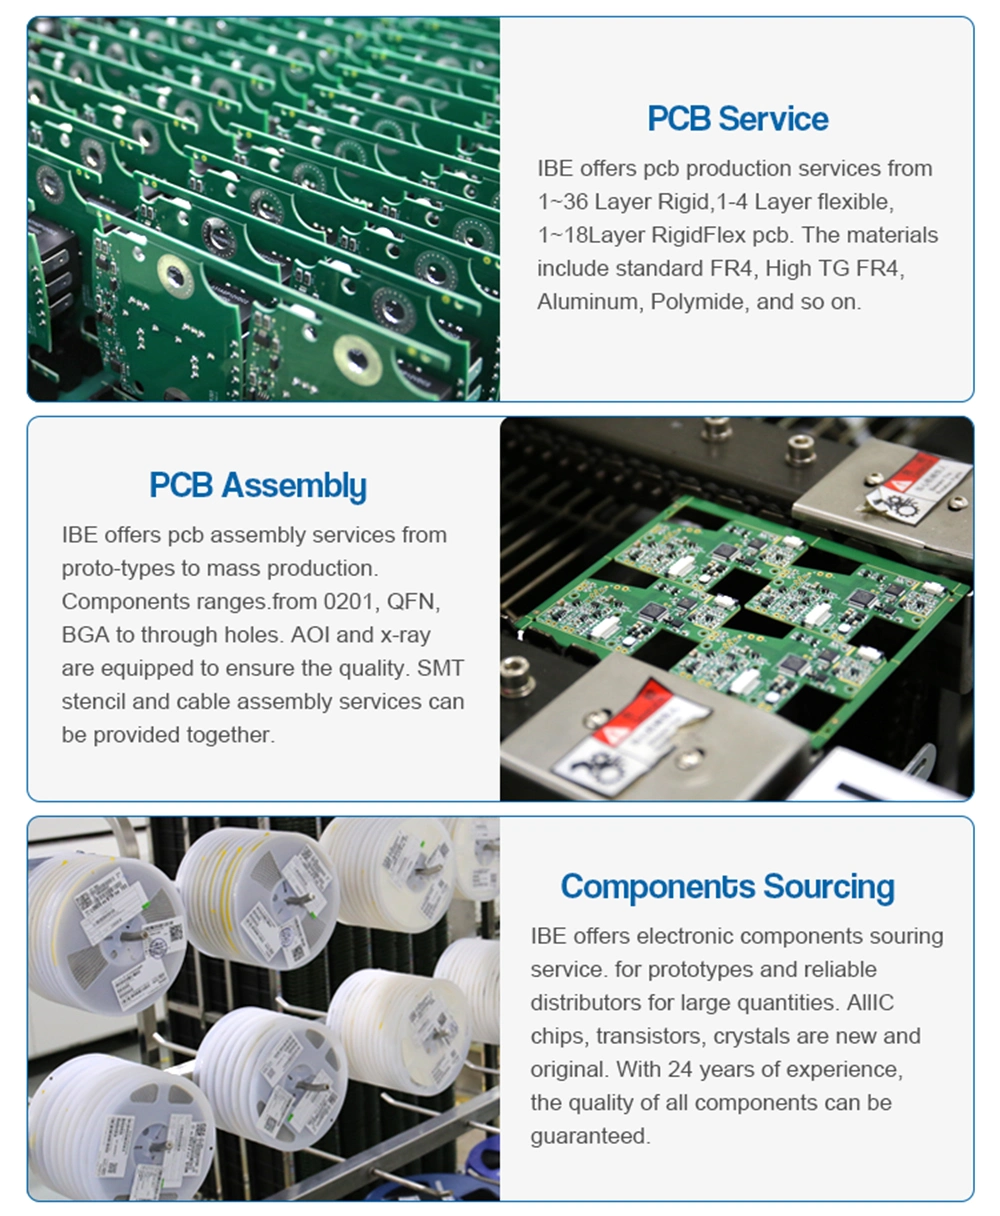 Multilayer PCBA Design Reverse Engineering Copy Clone Manufacturer Assembly Other PCB Motherboard